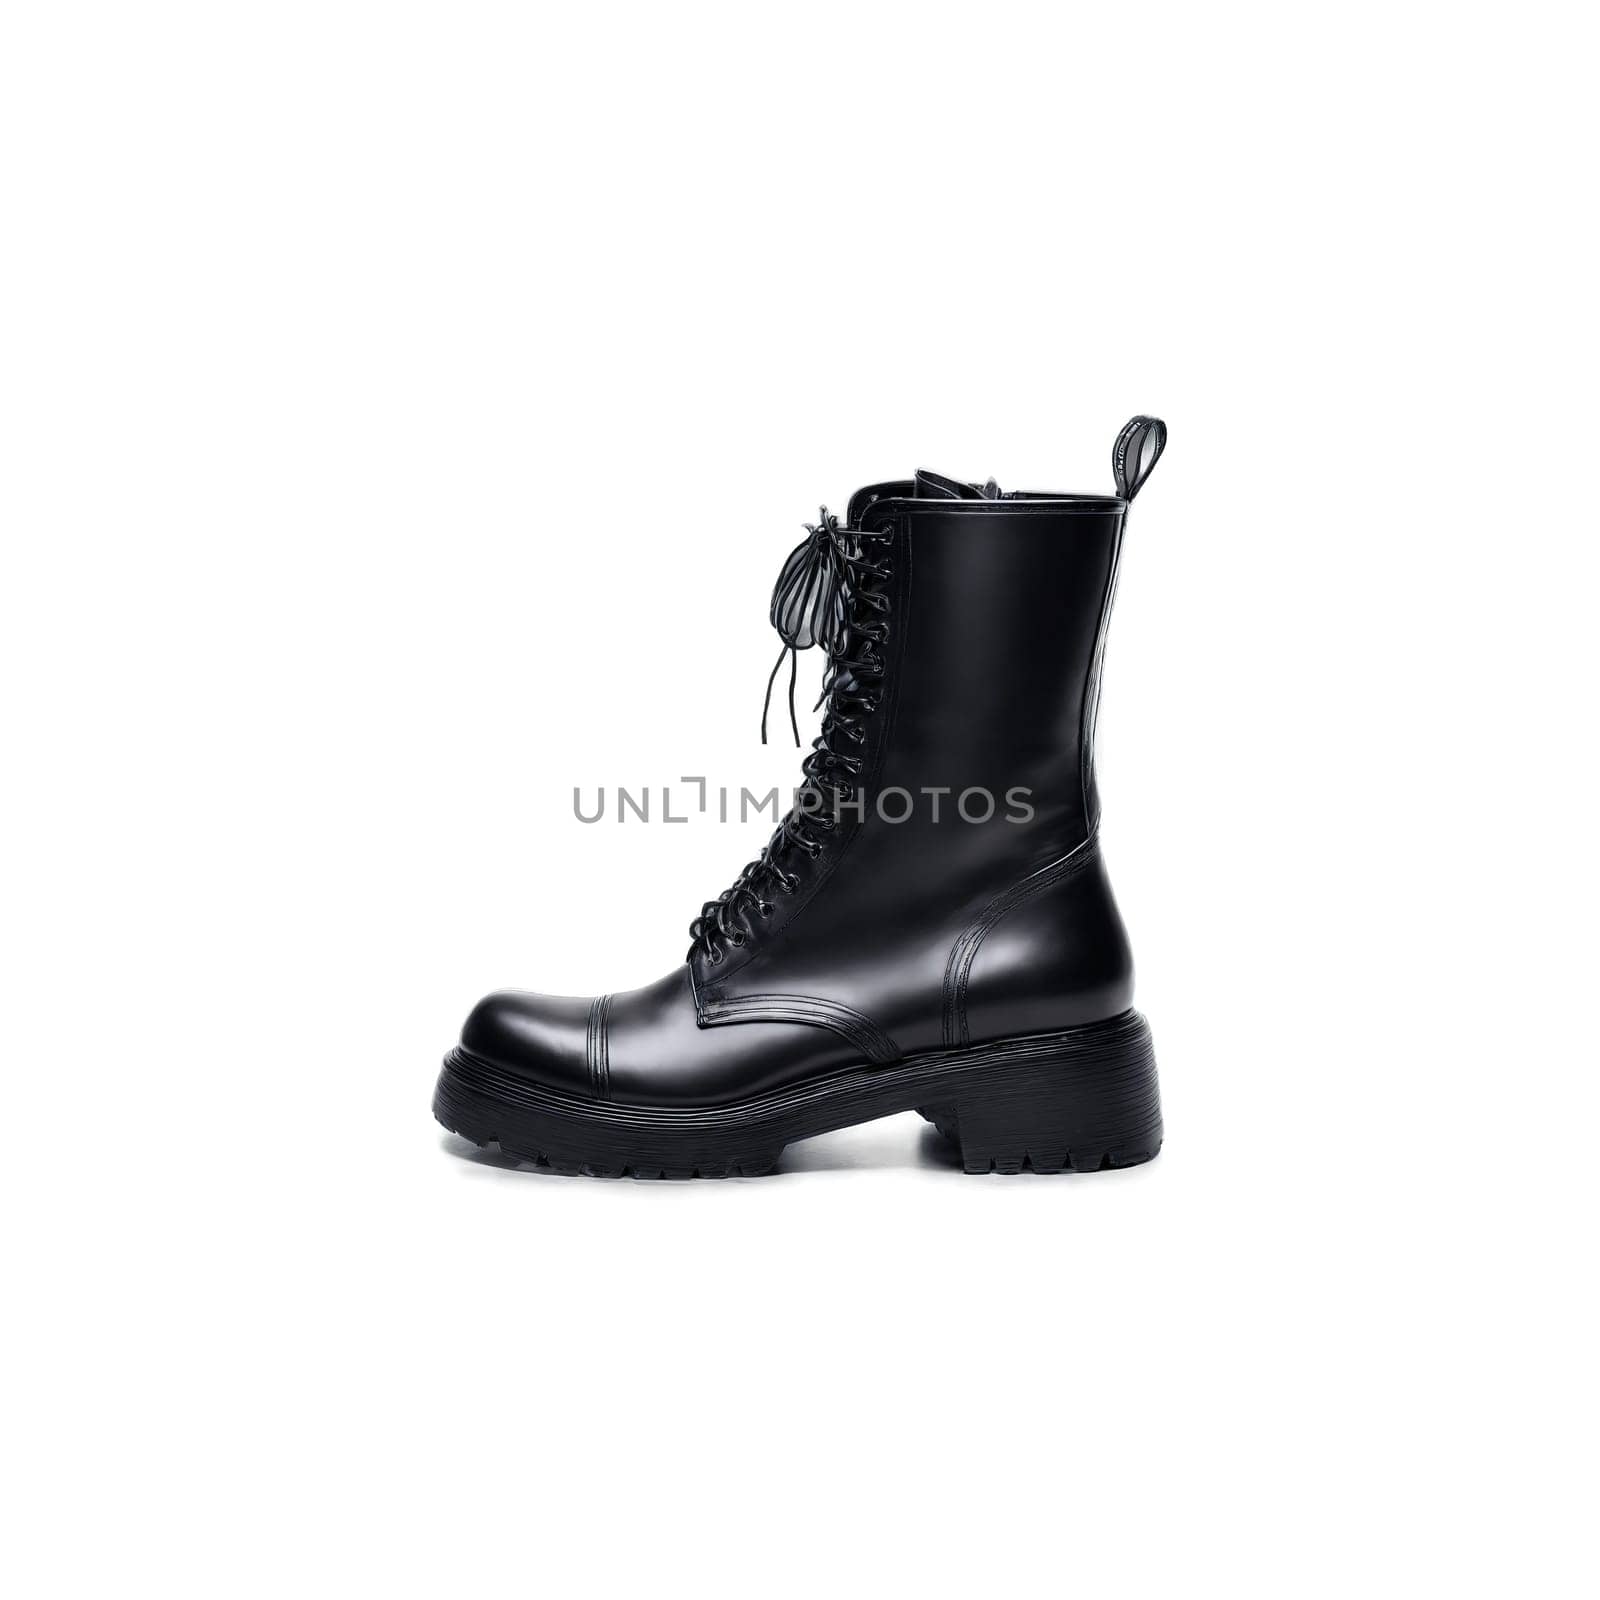 Edgy black combat boots Rugged black leather combat boots with a rounded toe lace up by panophotograph